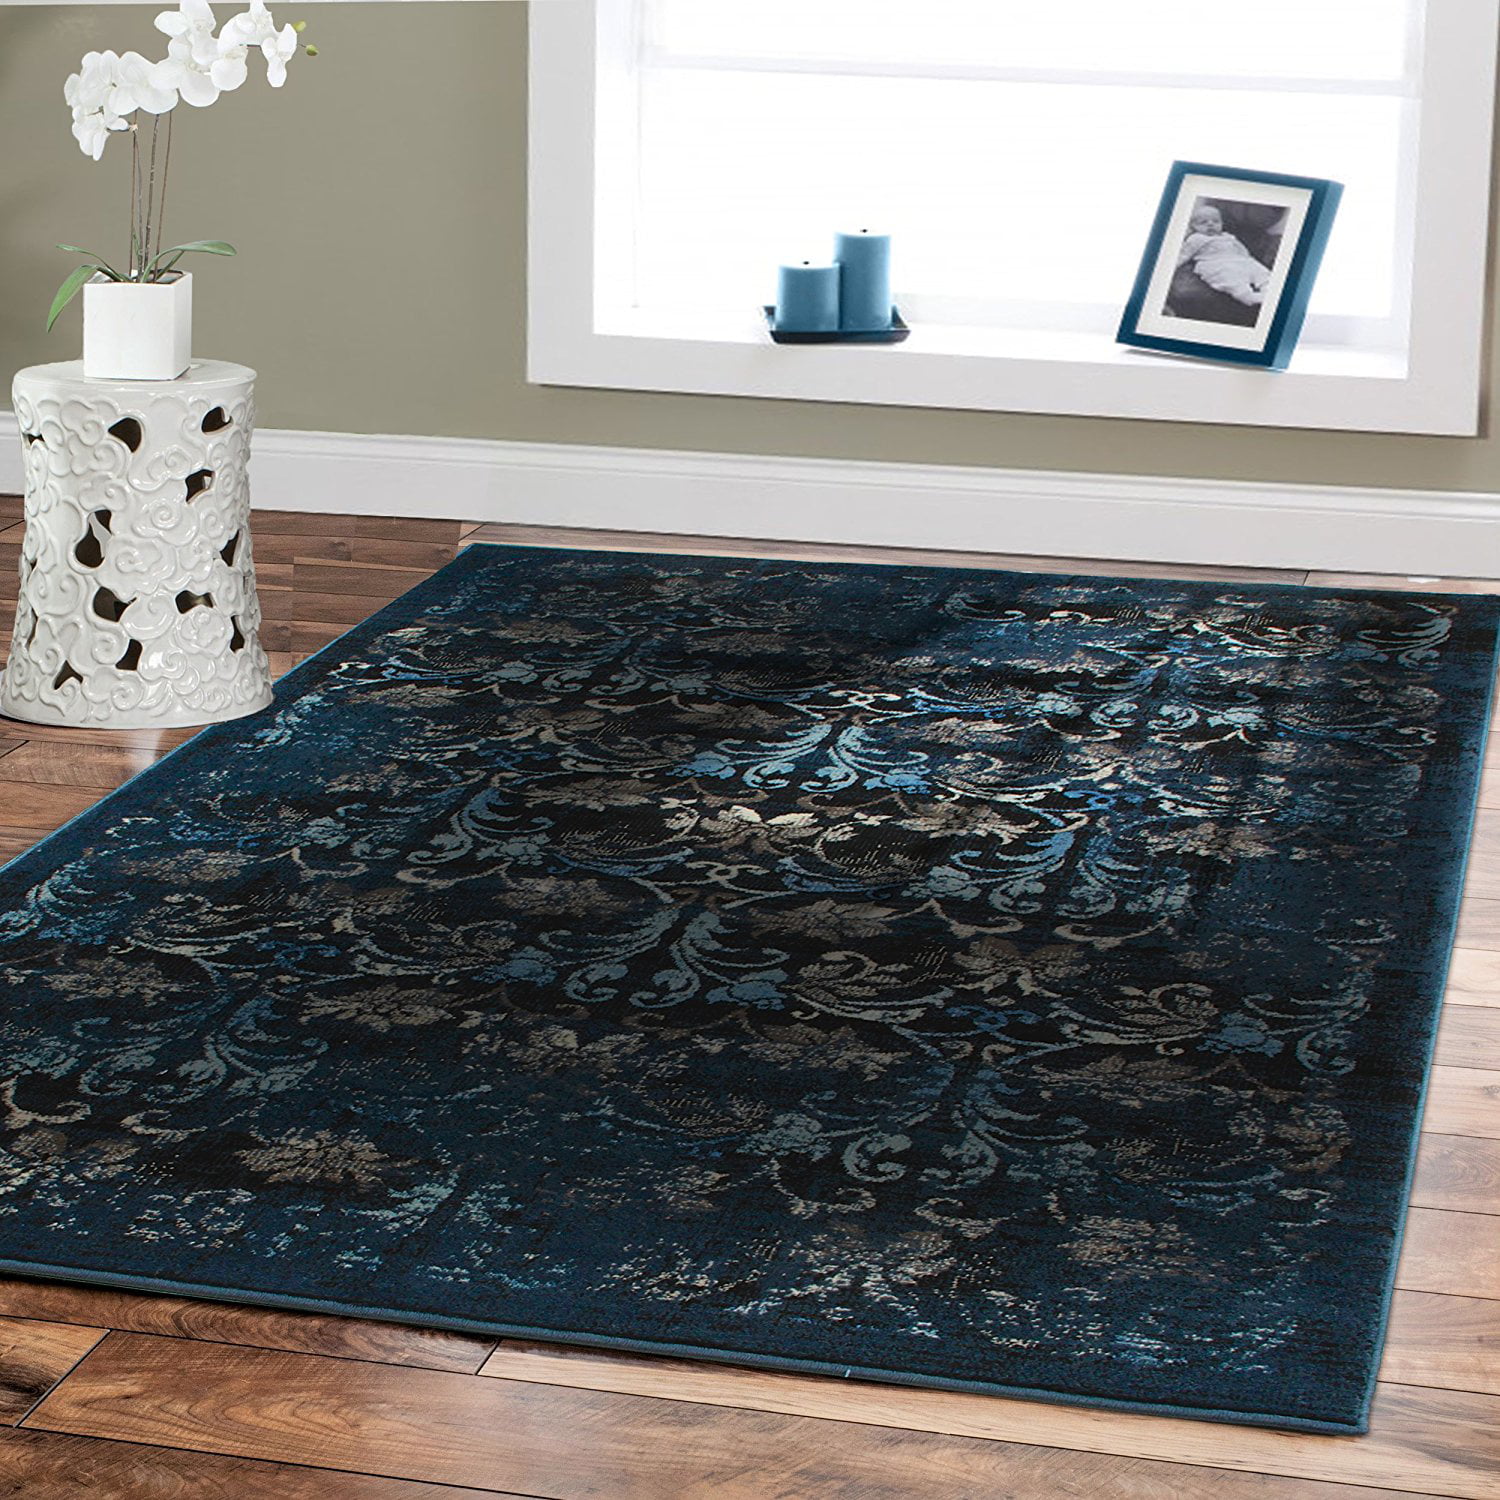 Premium Rugs Large 8x10 Rugs For Living Room 8x11 Area Rugs Under Table Area Rugs On Clearance Black Navy Distressed Rugs 8 By 10 Walmart Com Walmart Com